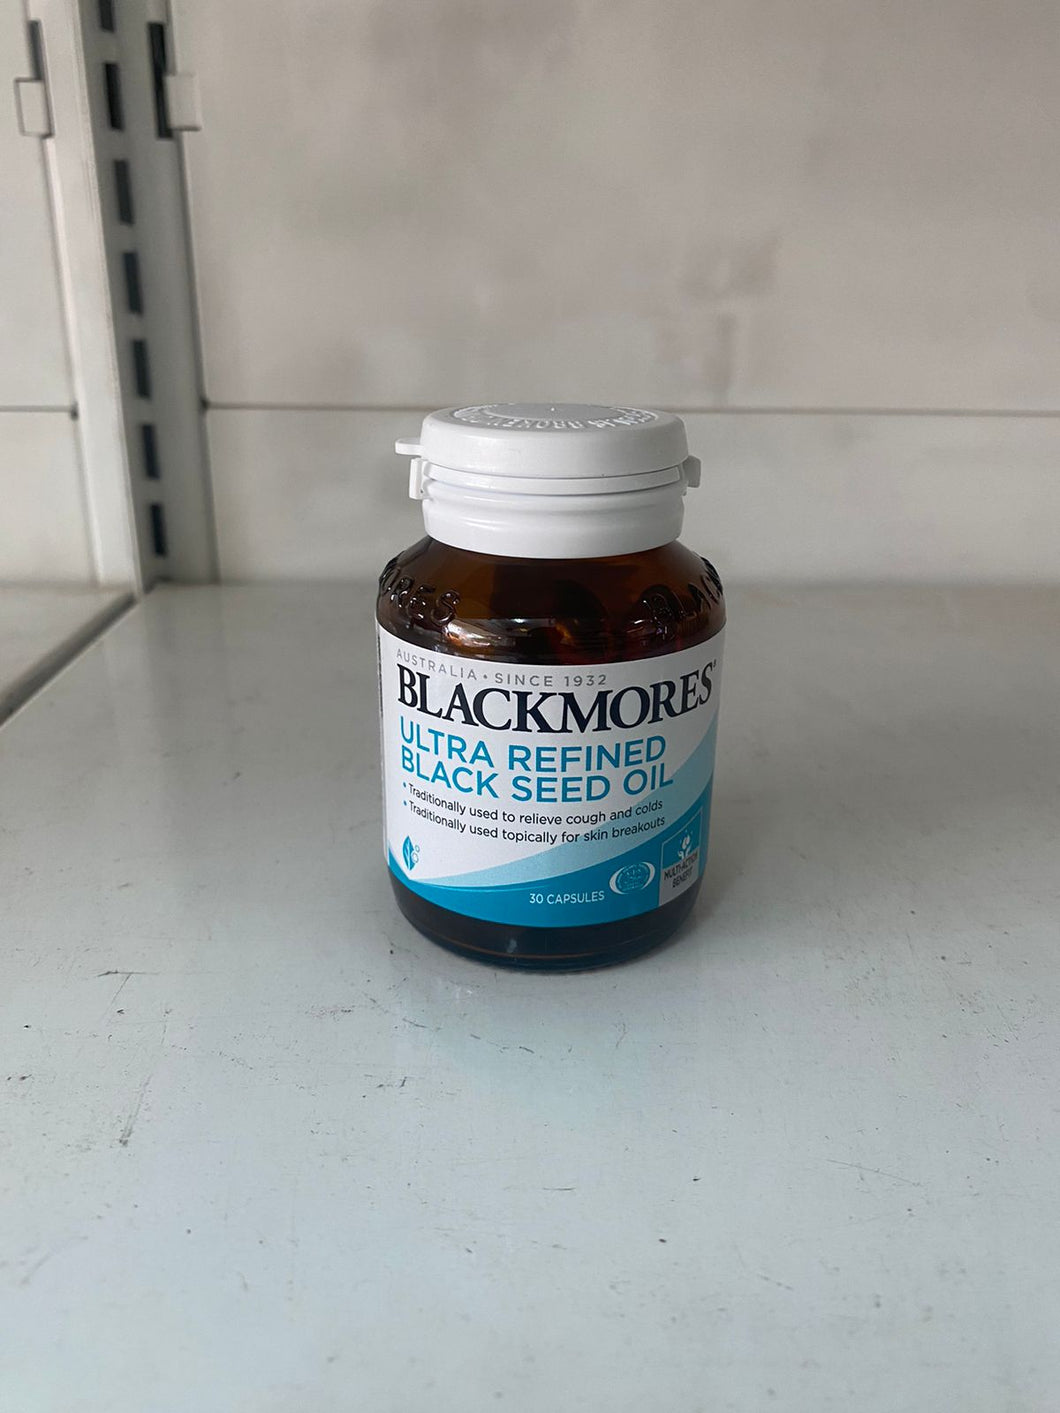 Blackmores Ultra refined Black seed Oil